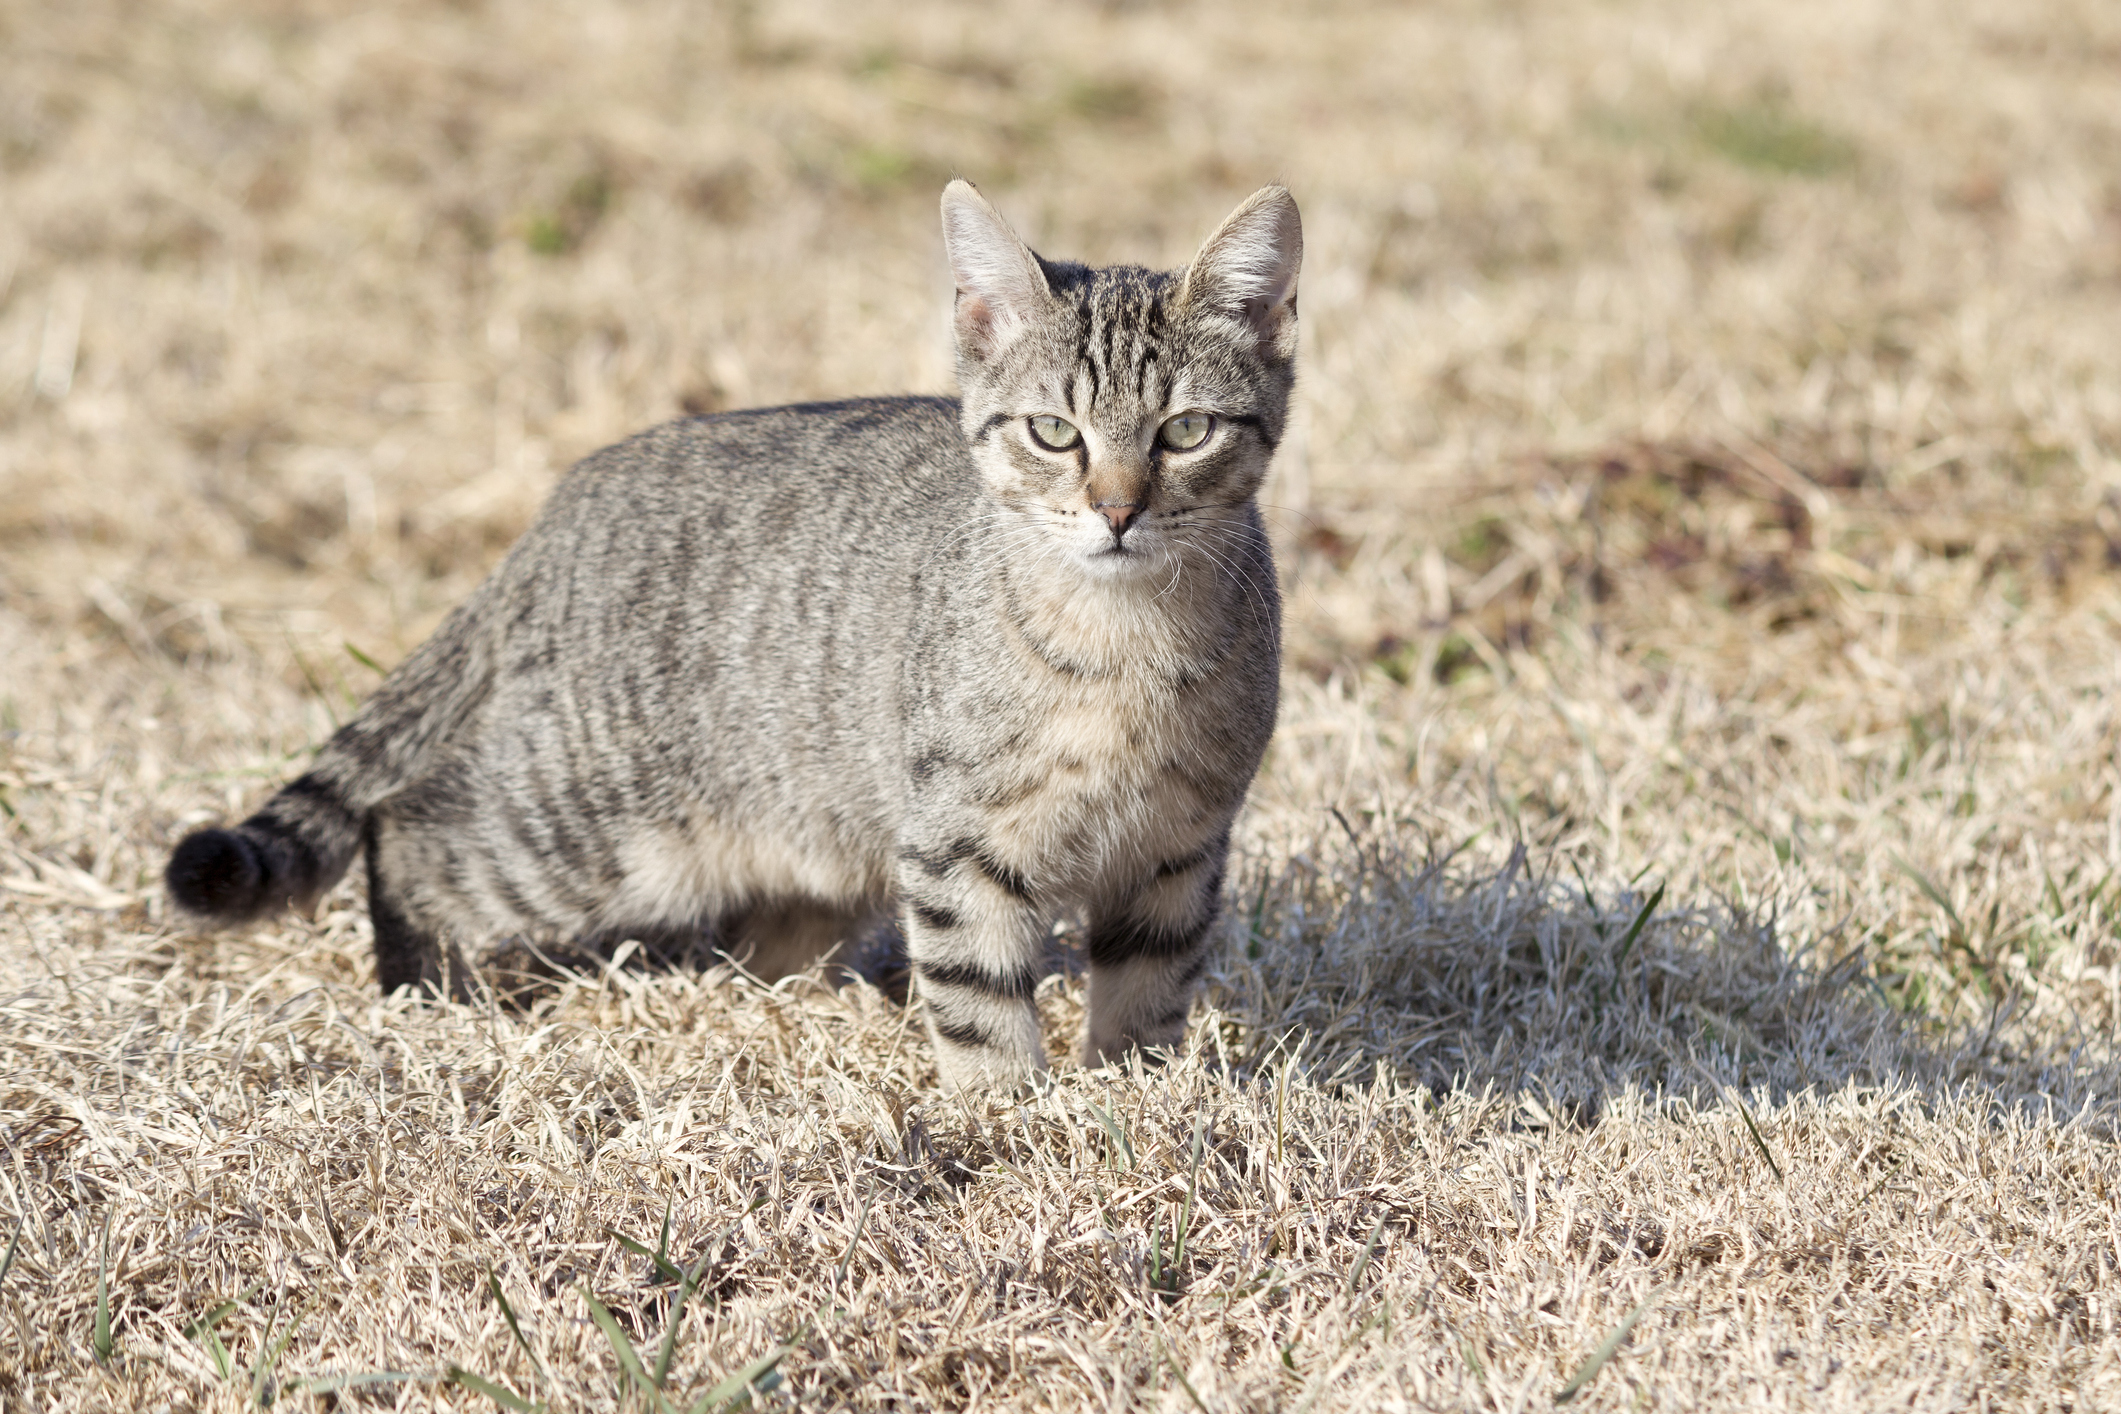 A cat standing in a dry grassed field